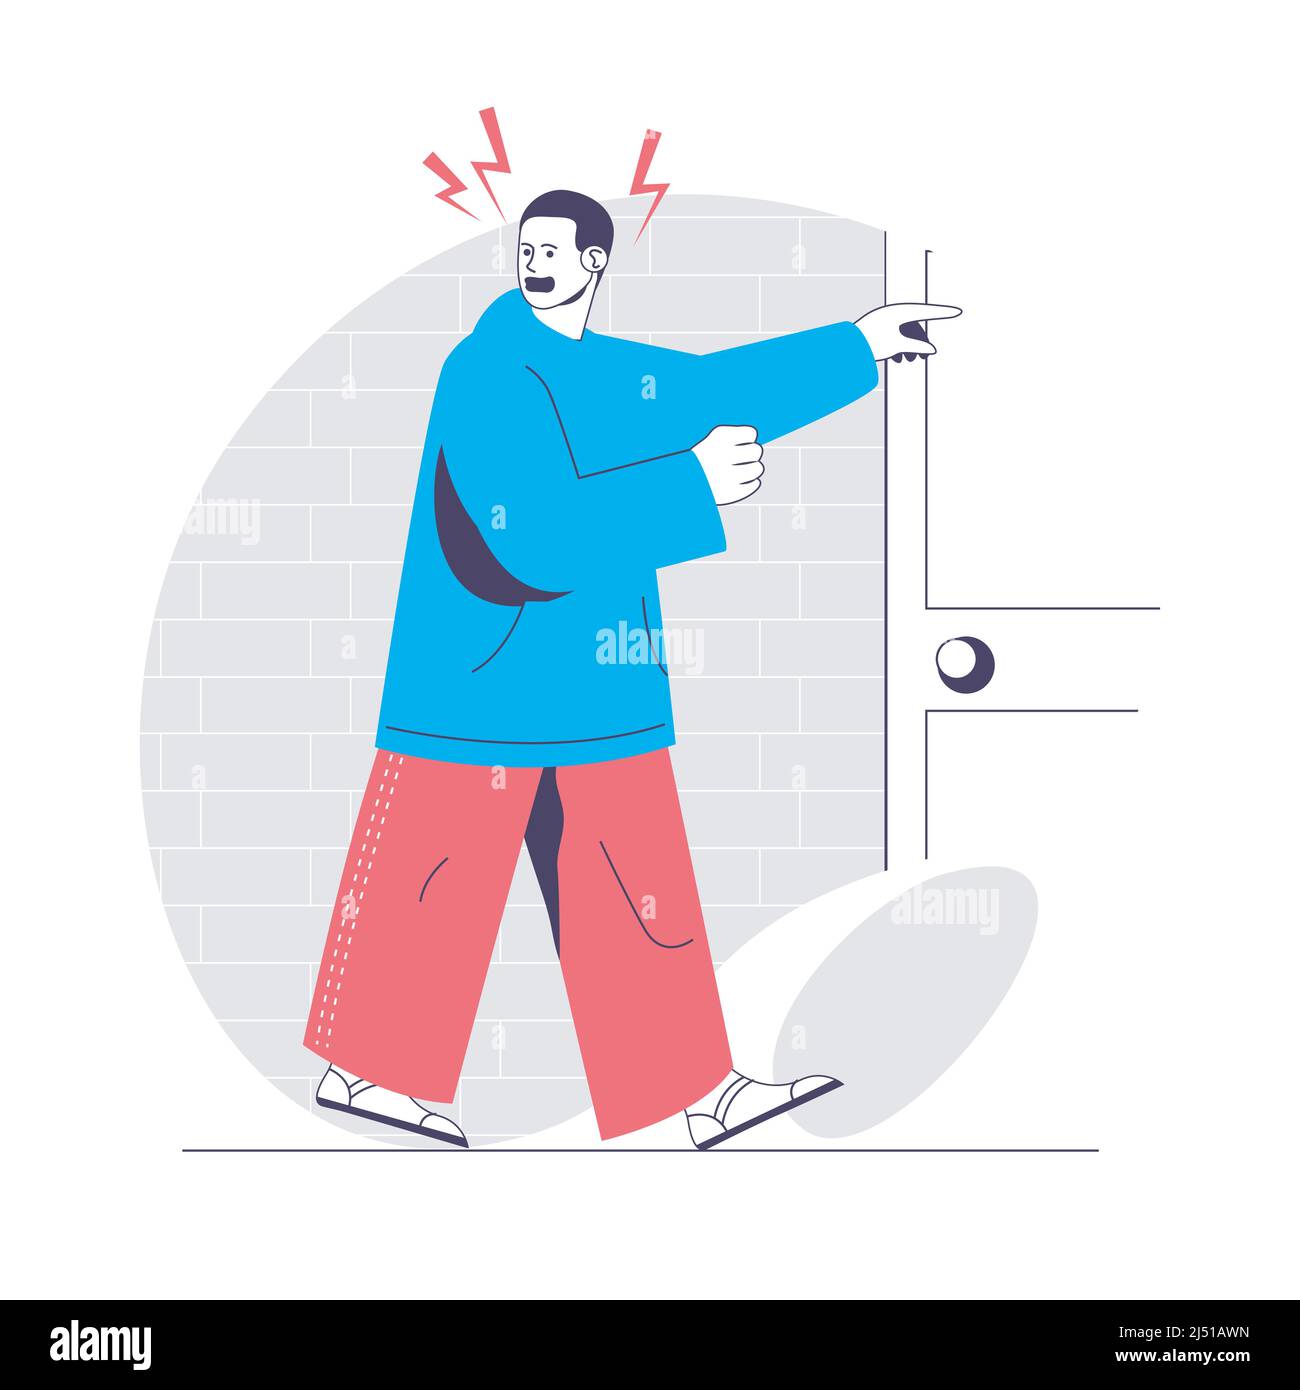 Anger emotion web concept. Angry man gesturing and screaming. Expression negative feelings people scene. Flat characters design for website. Vector il Stock Vector